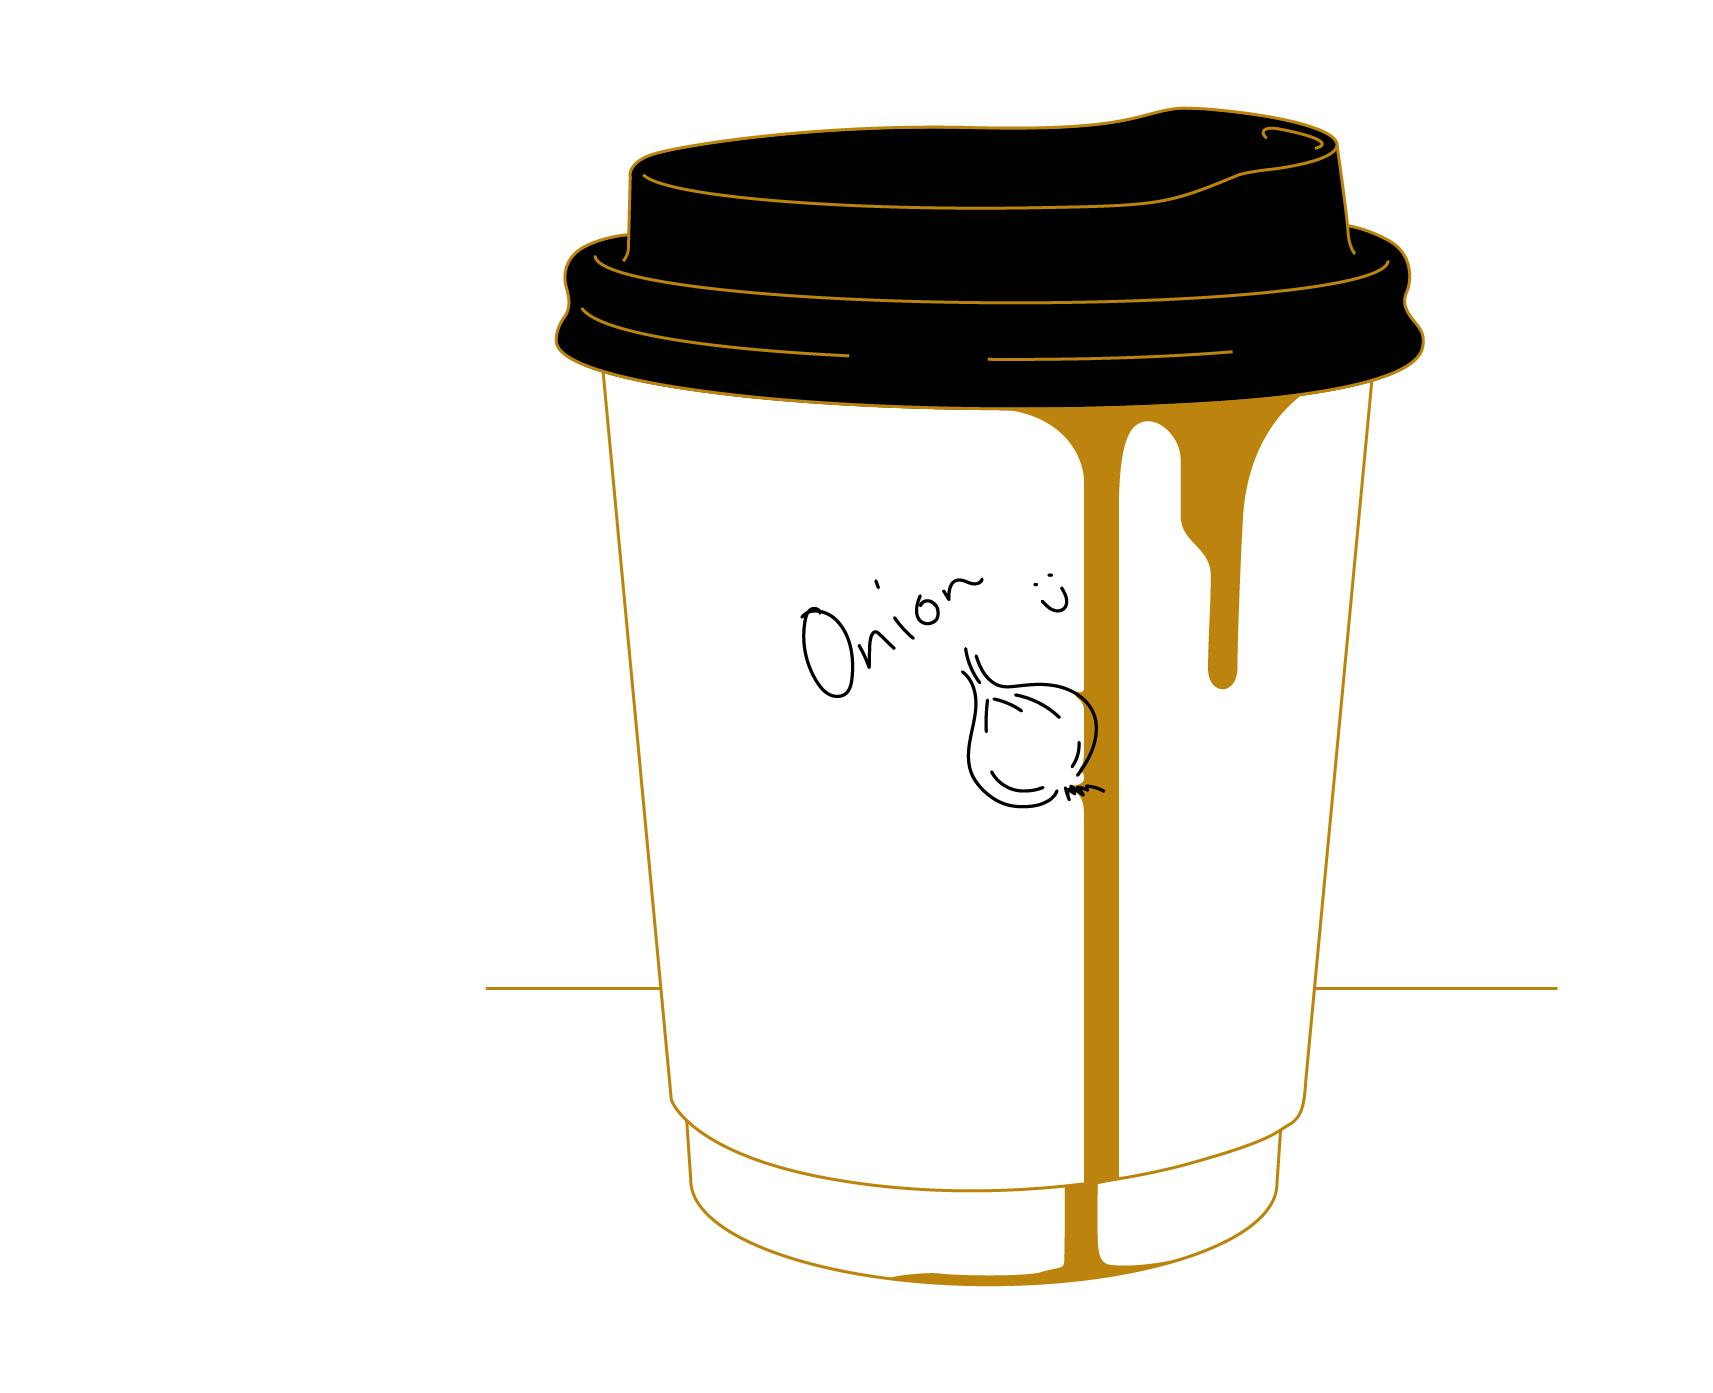 A takeaway coffee up with the name "Onion" written on it and a small drawing of an onion. It is a variation of the designers name, Anya.